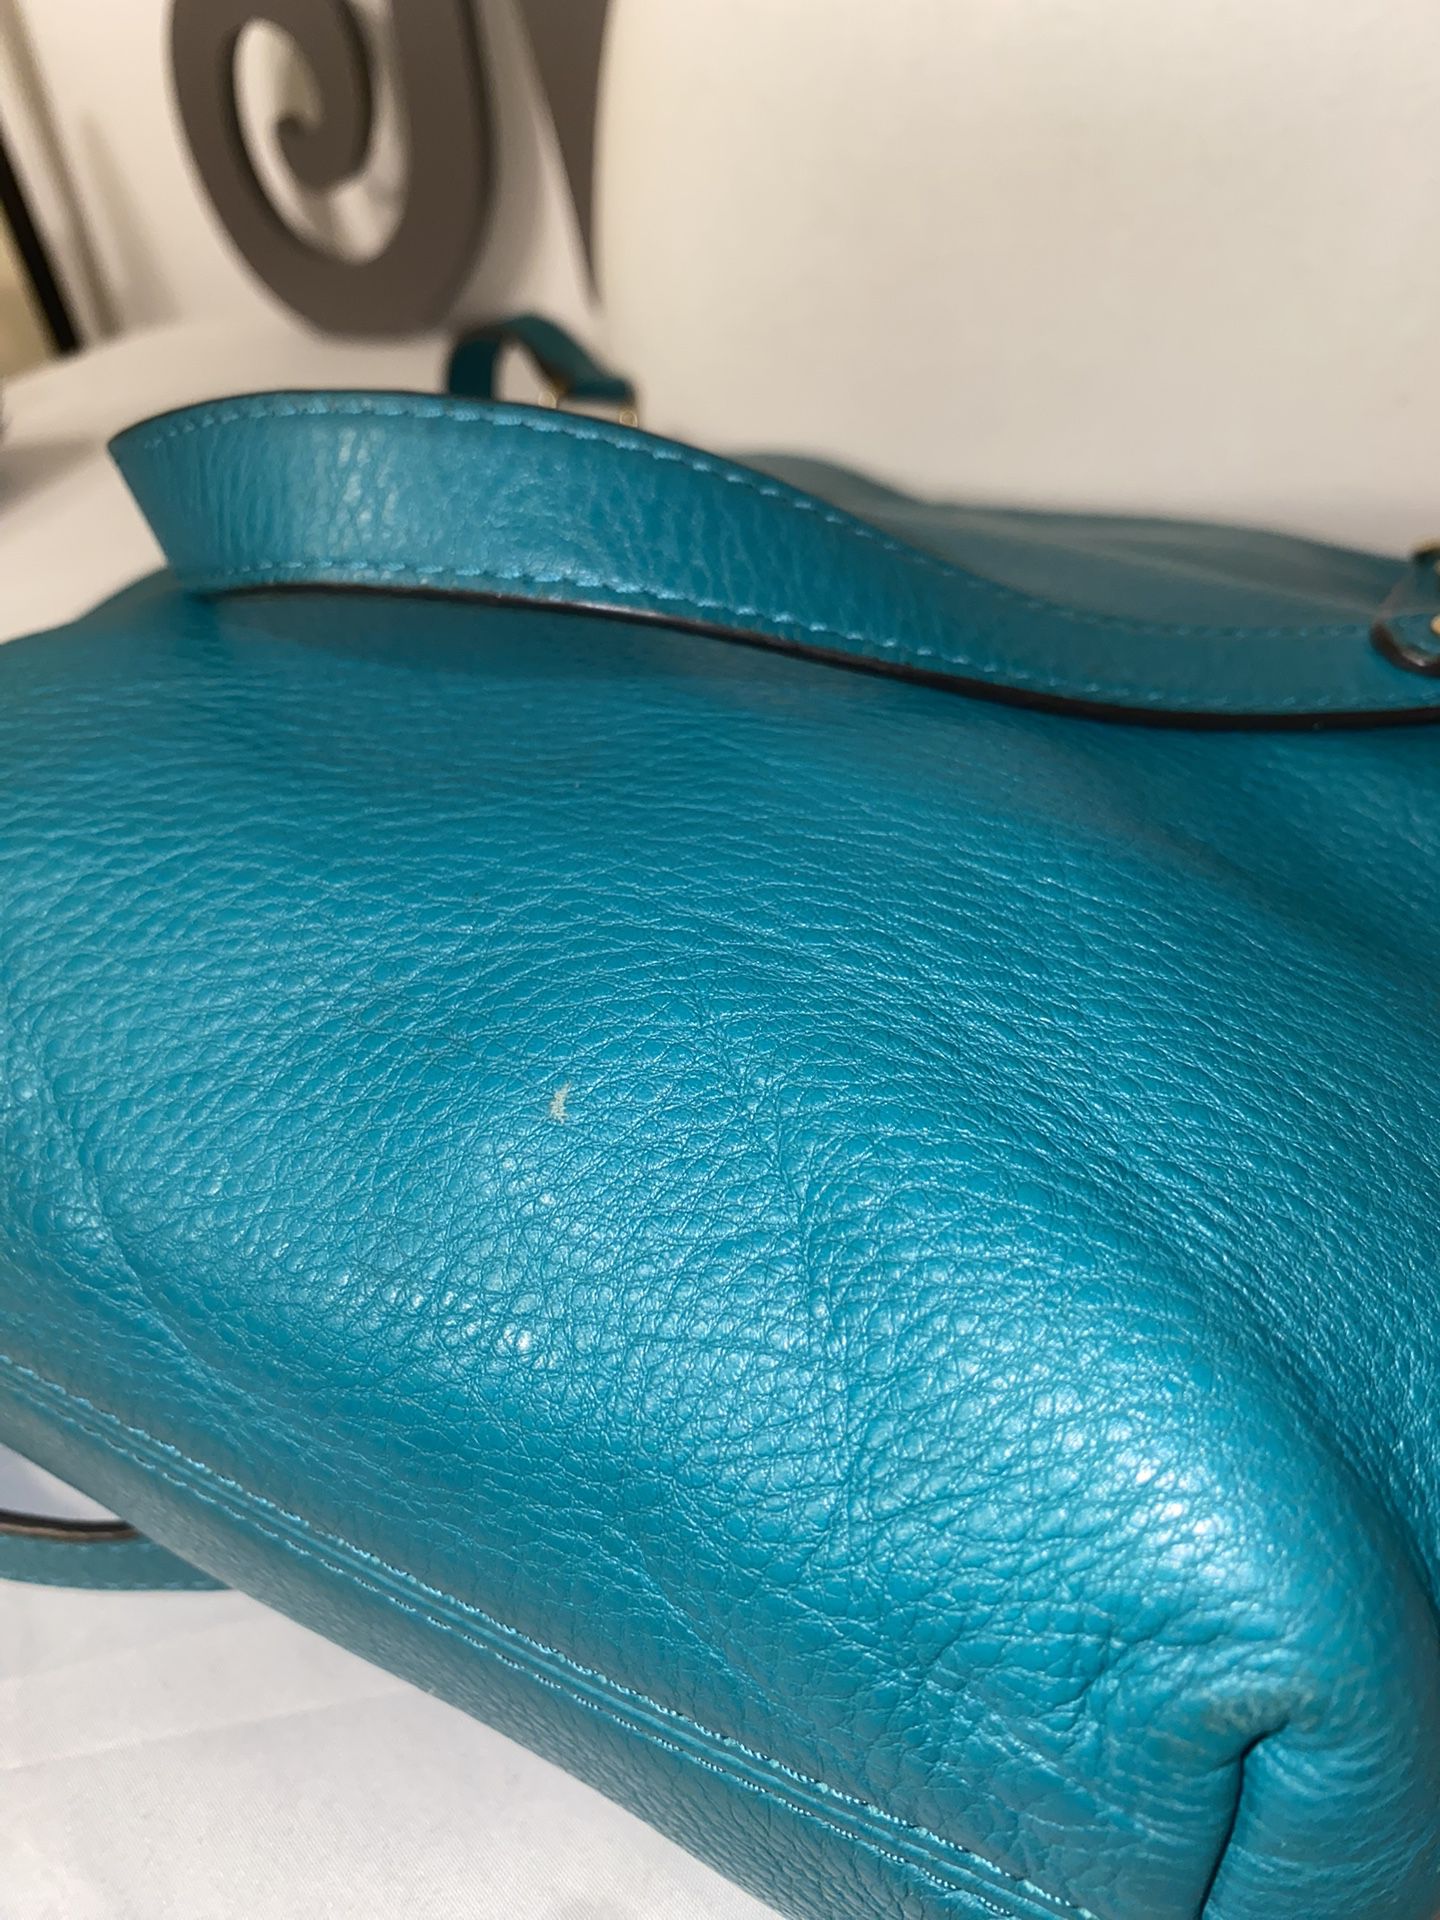 Michael Kors Saffiano Leather 3-in-1 Crossbody Clutch for Sale in Woodburn,  OR - OfferUp